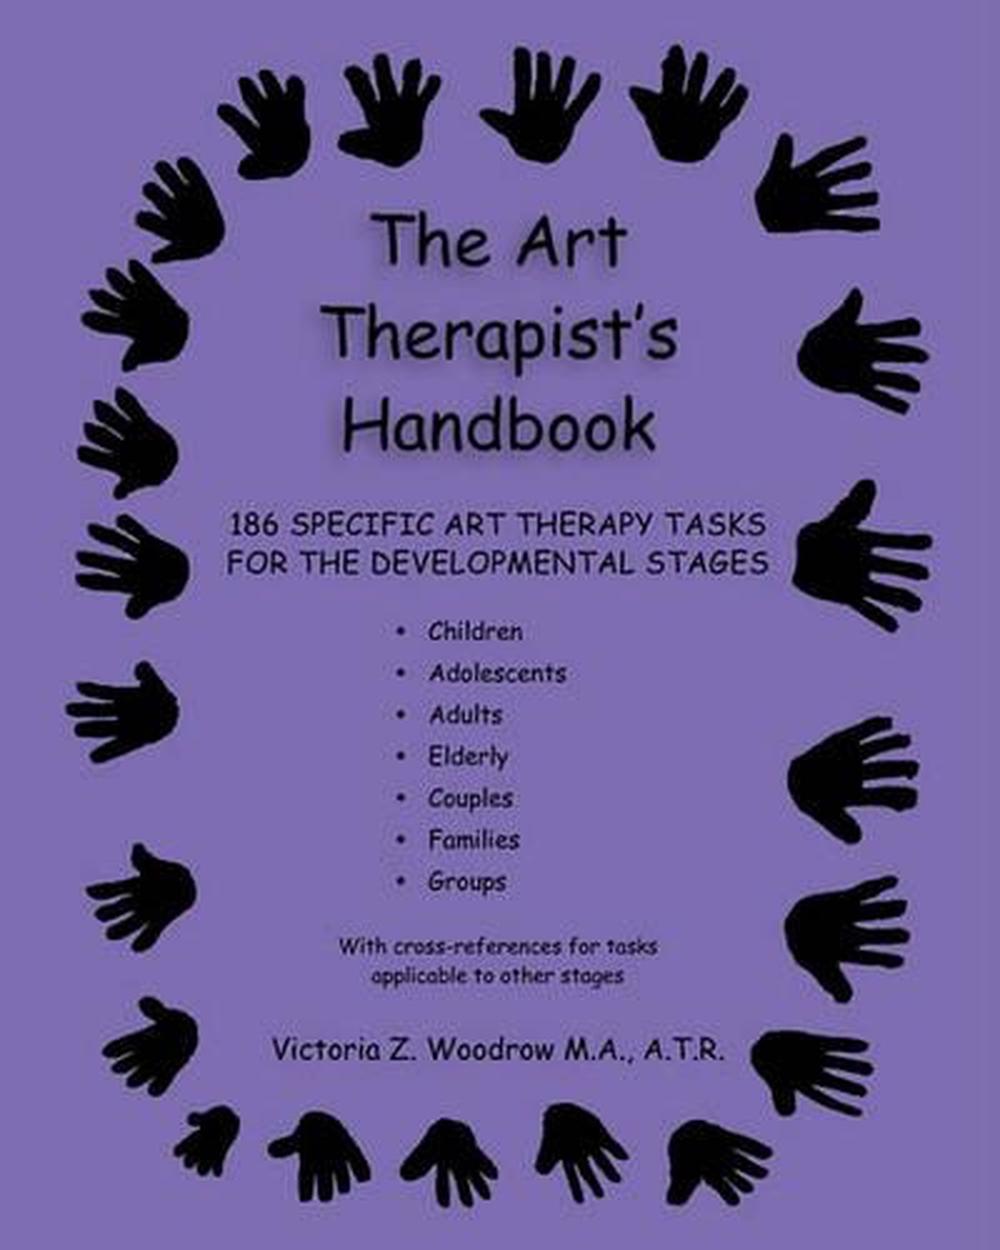 The-Art-Therapists-Handbook-186-Specific-Art-Therapy-Tasks-for-the-Developmental-Stages